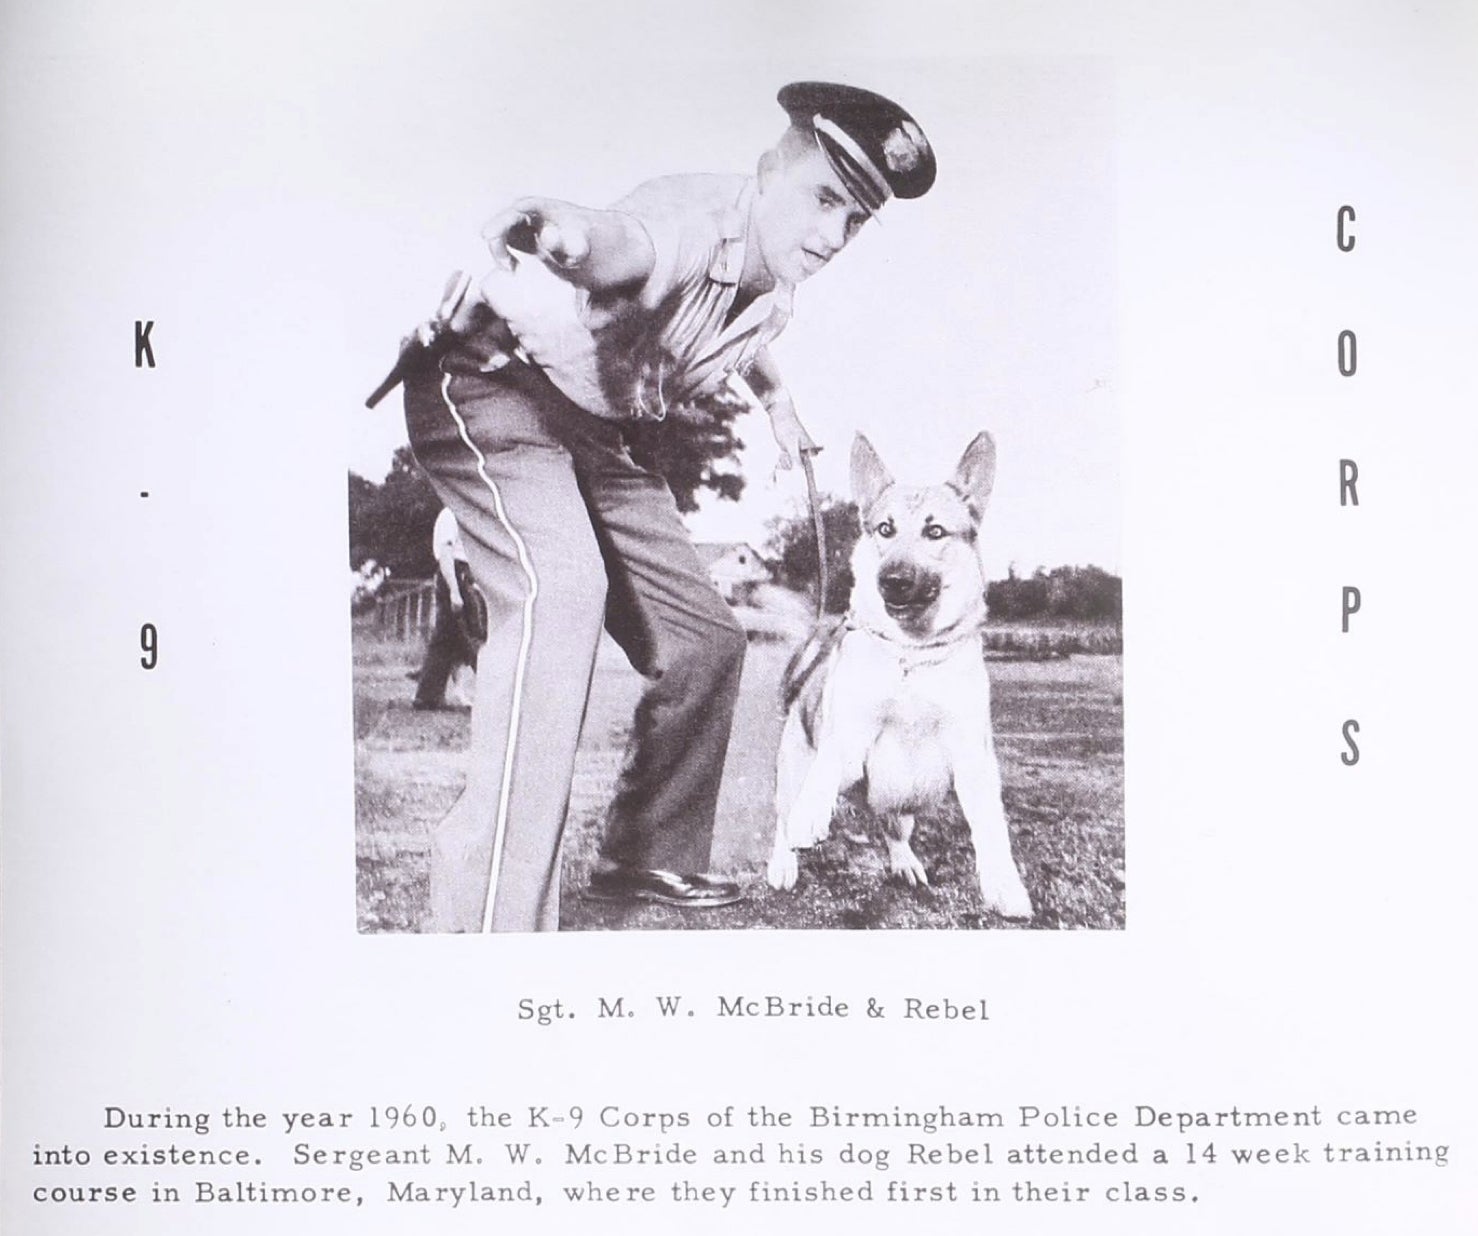 An archival photo of Sgt.  M.W. McBride with police dog Rebel, a German shepherd.